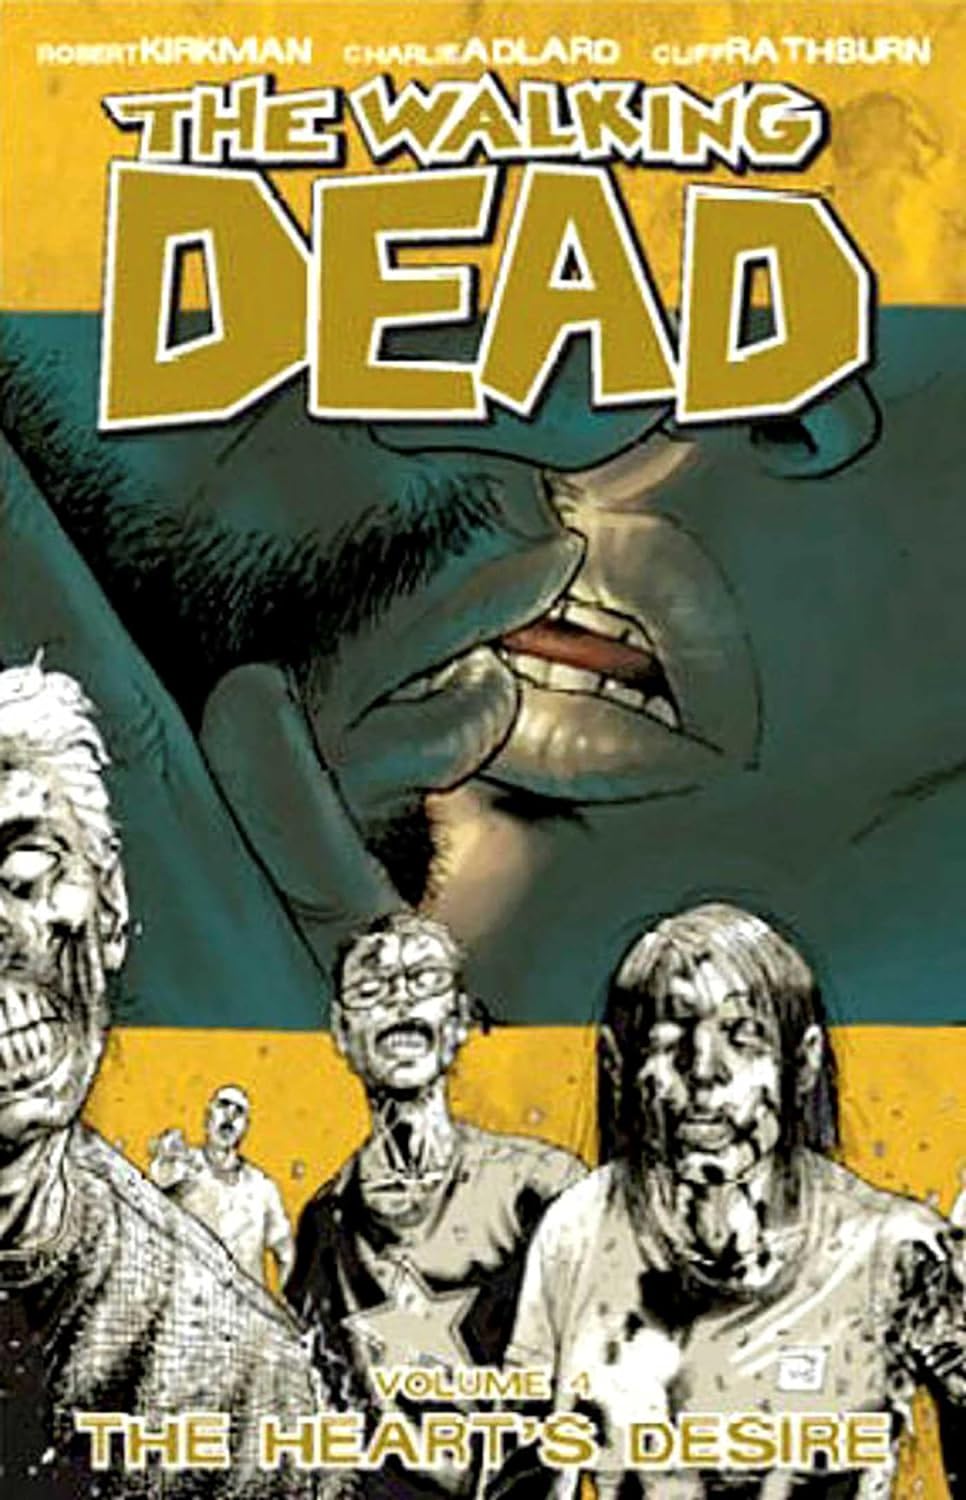 Cover image of The Walking Dead, Vol. 04 Hearts Desire